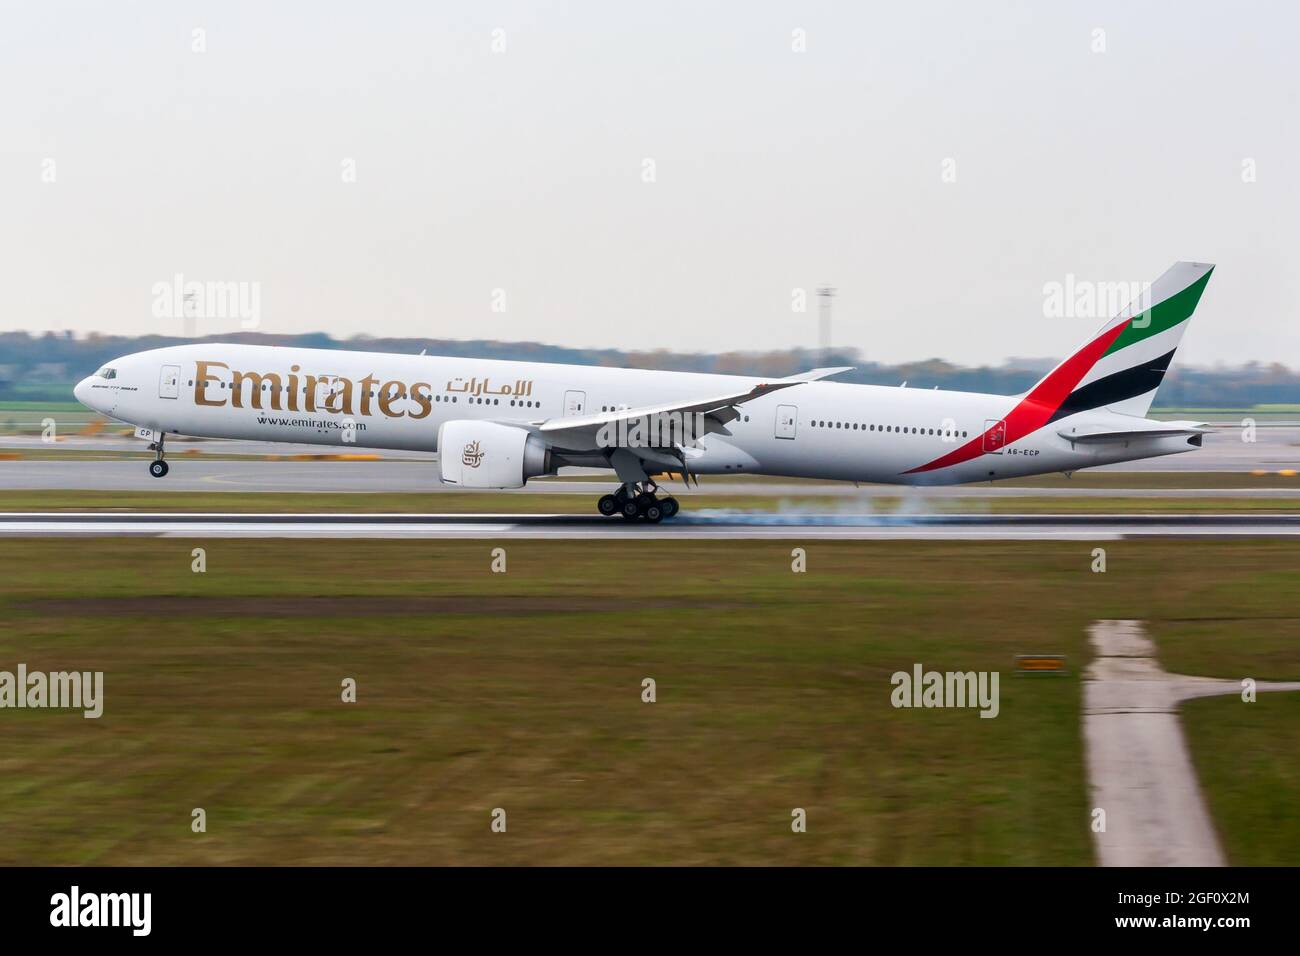 Vienna, Austria - November 30, 2011: Emirates Airlines passenger plane at airport. Schedule flight travel. Aviation and aircraft. Air transport. Globa Stock Photo